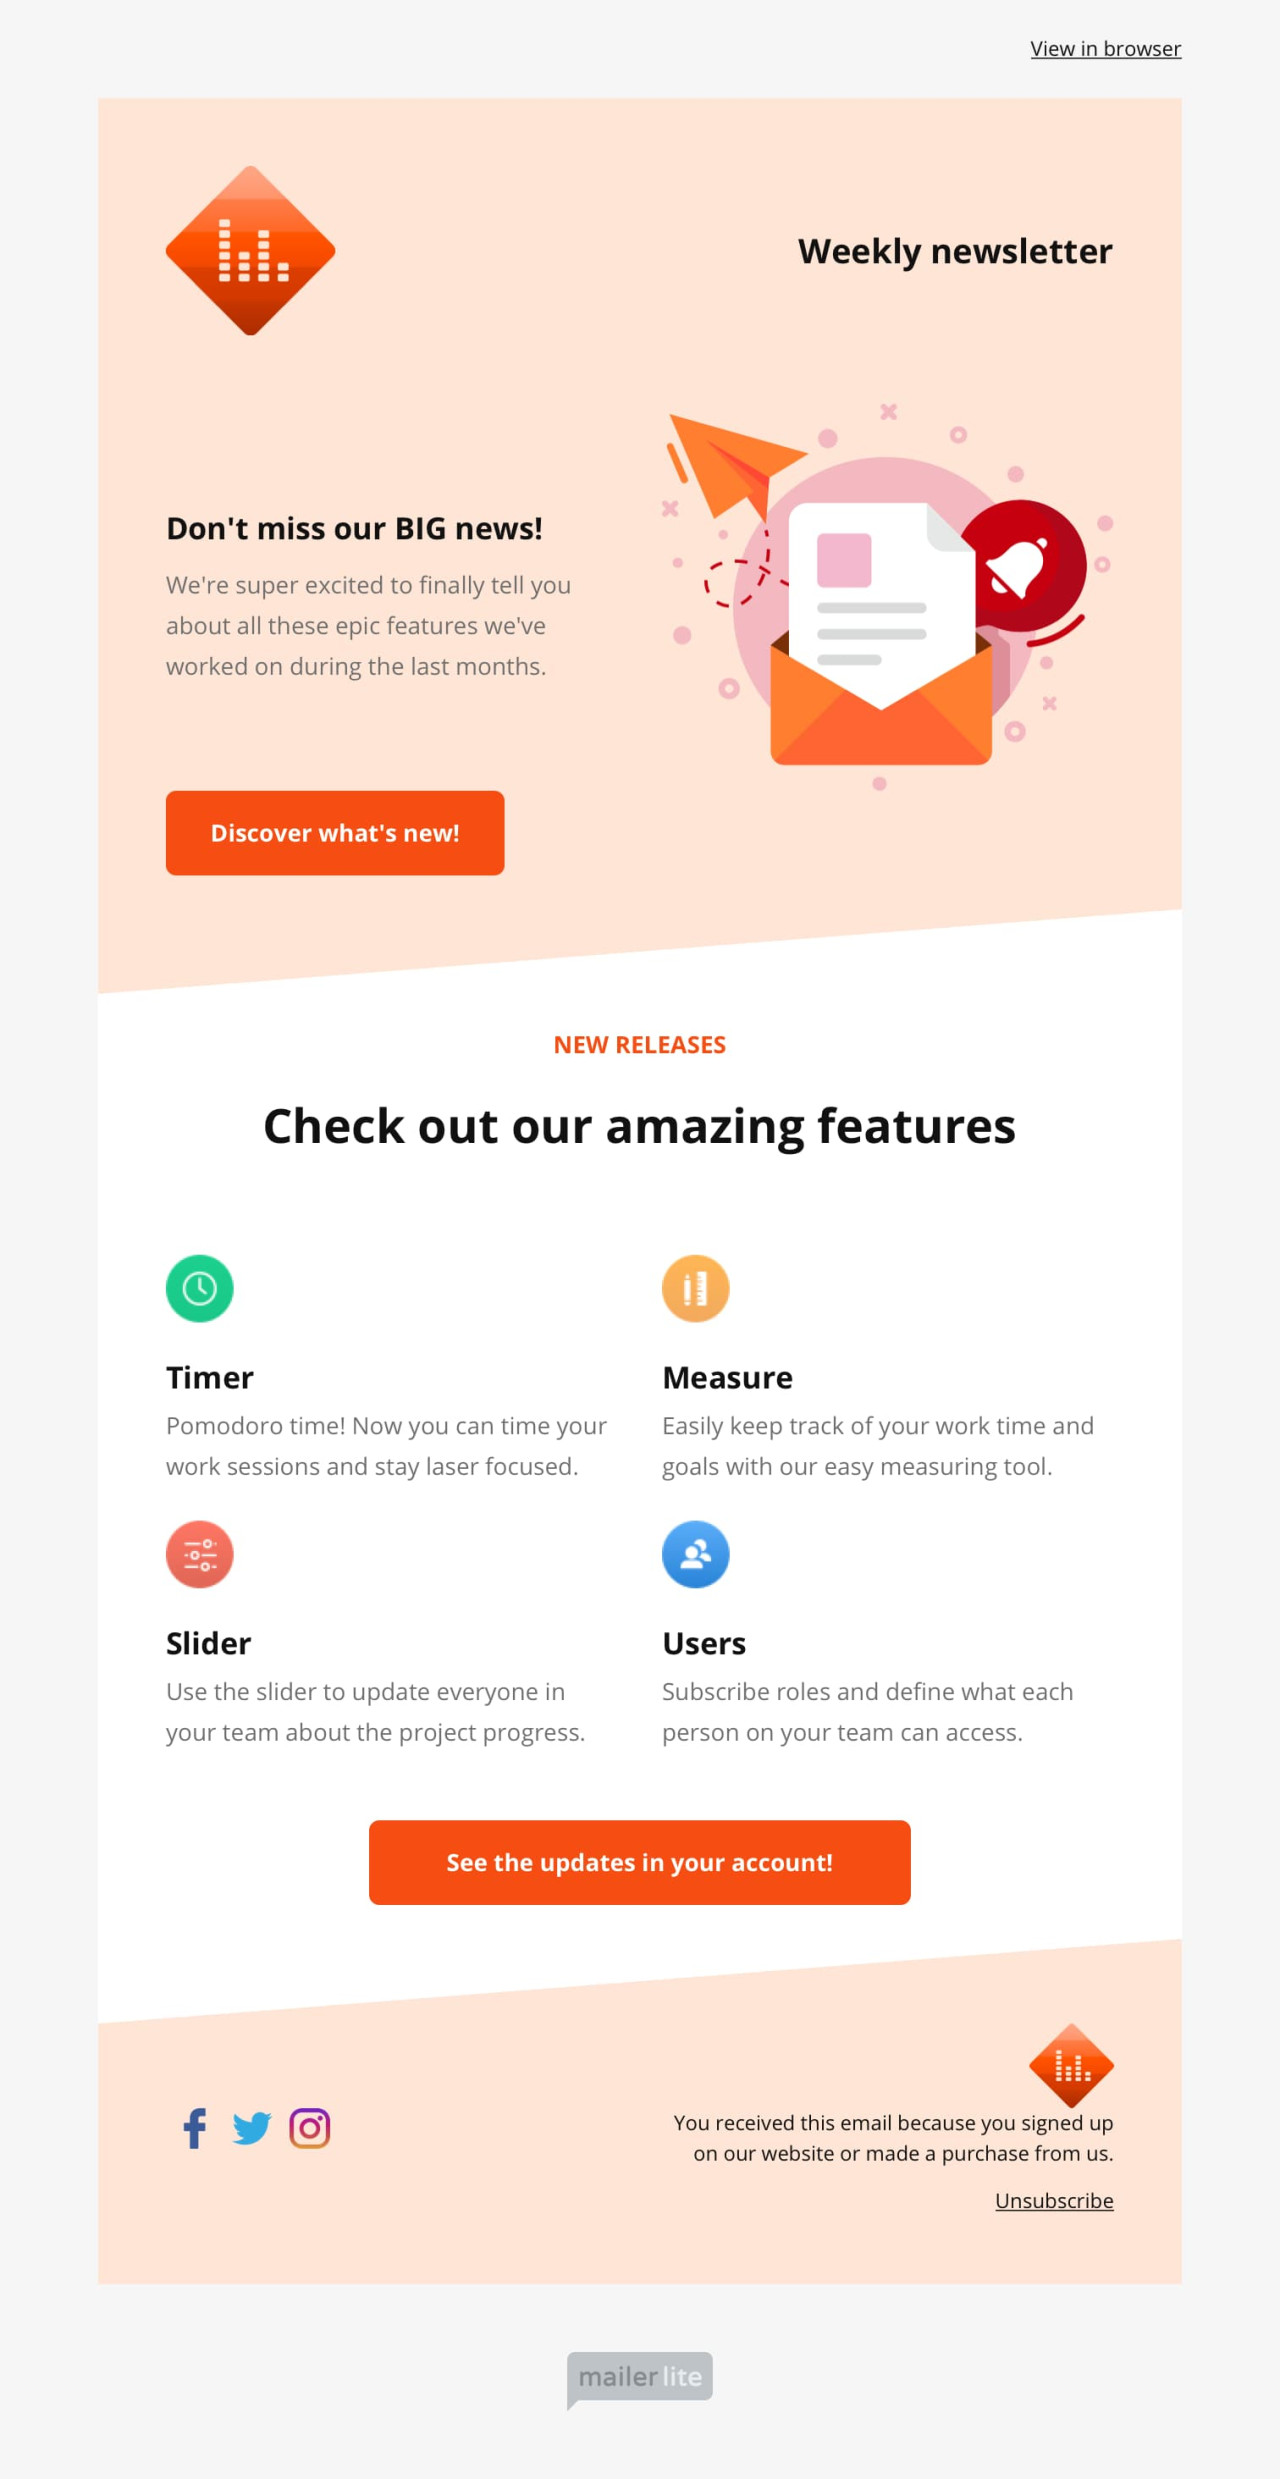 Product update email template - Made by MailerLite